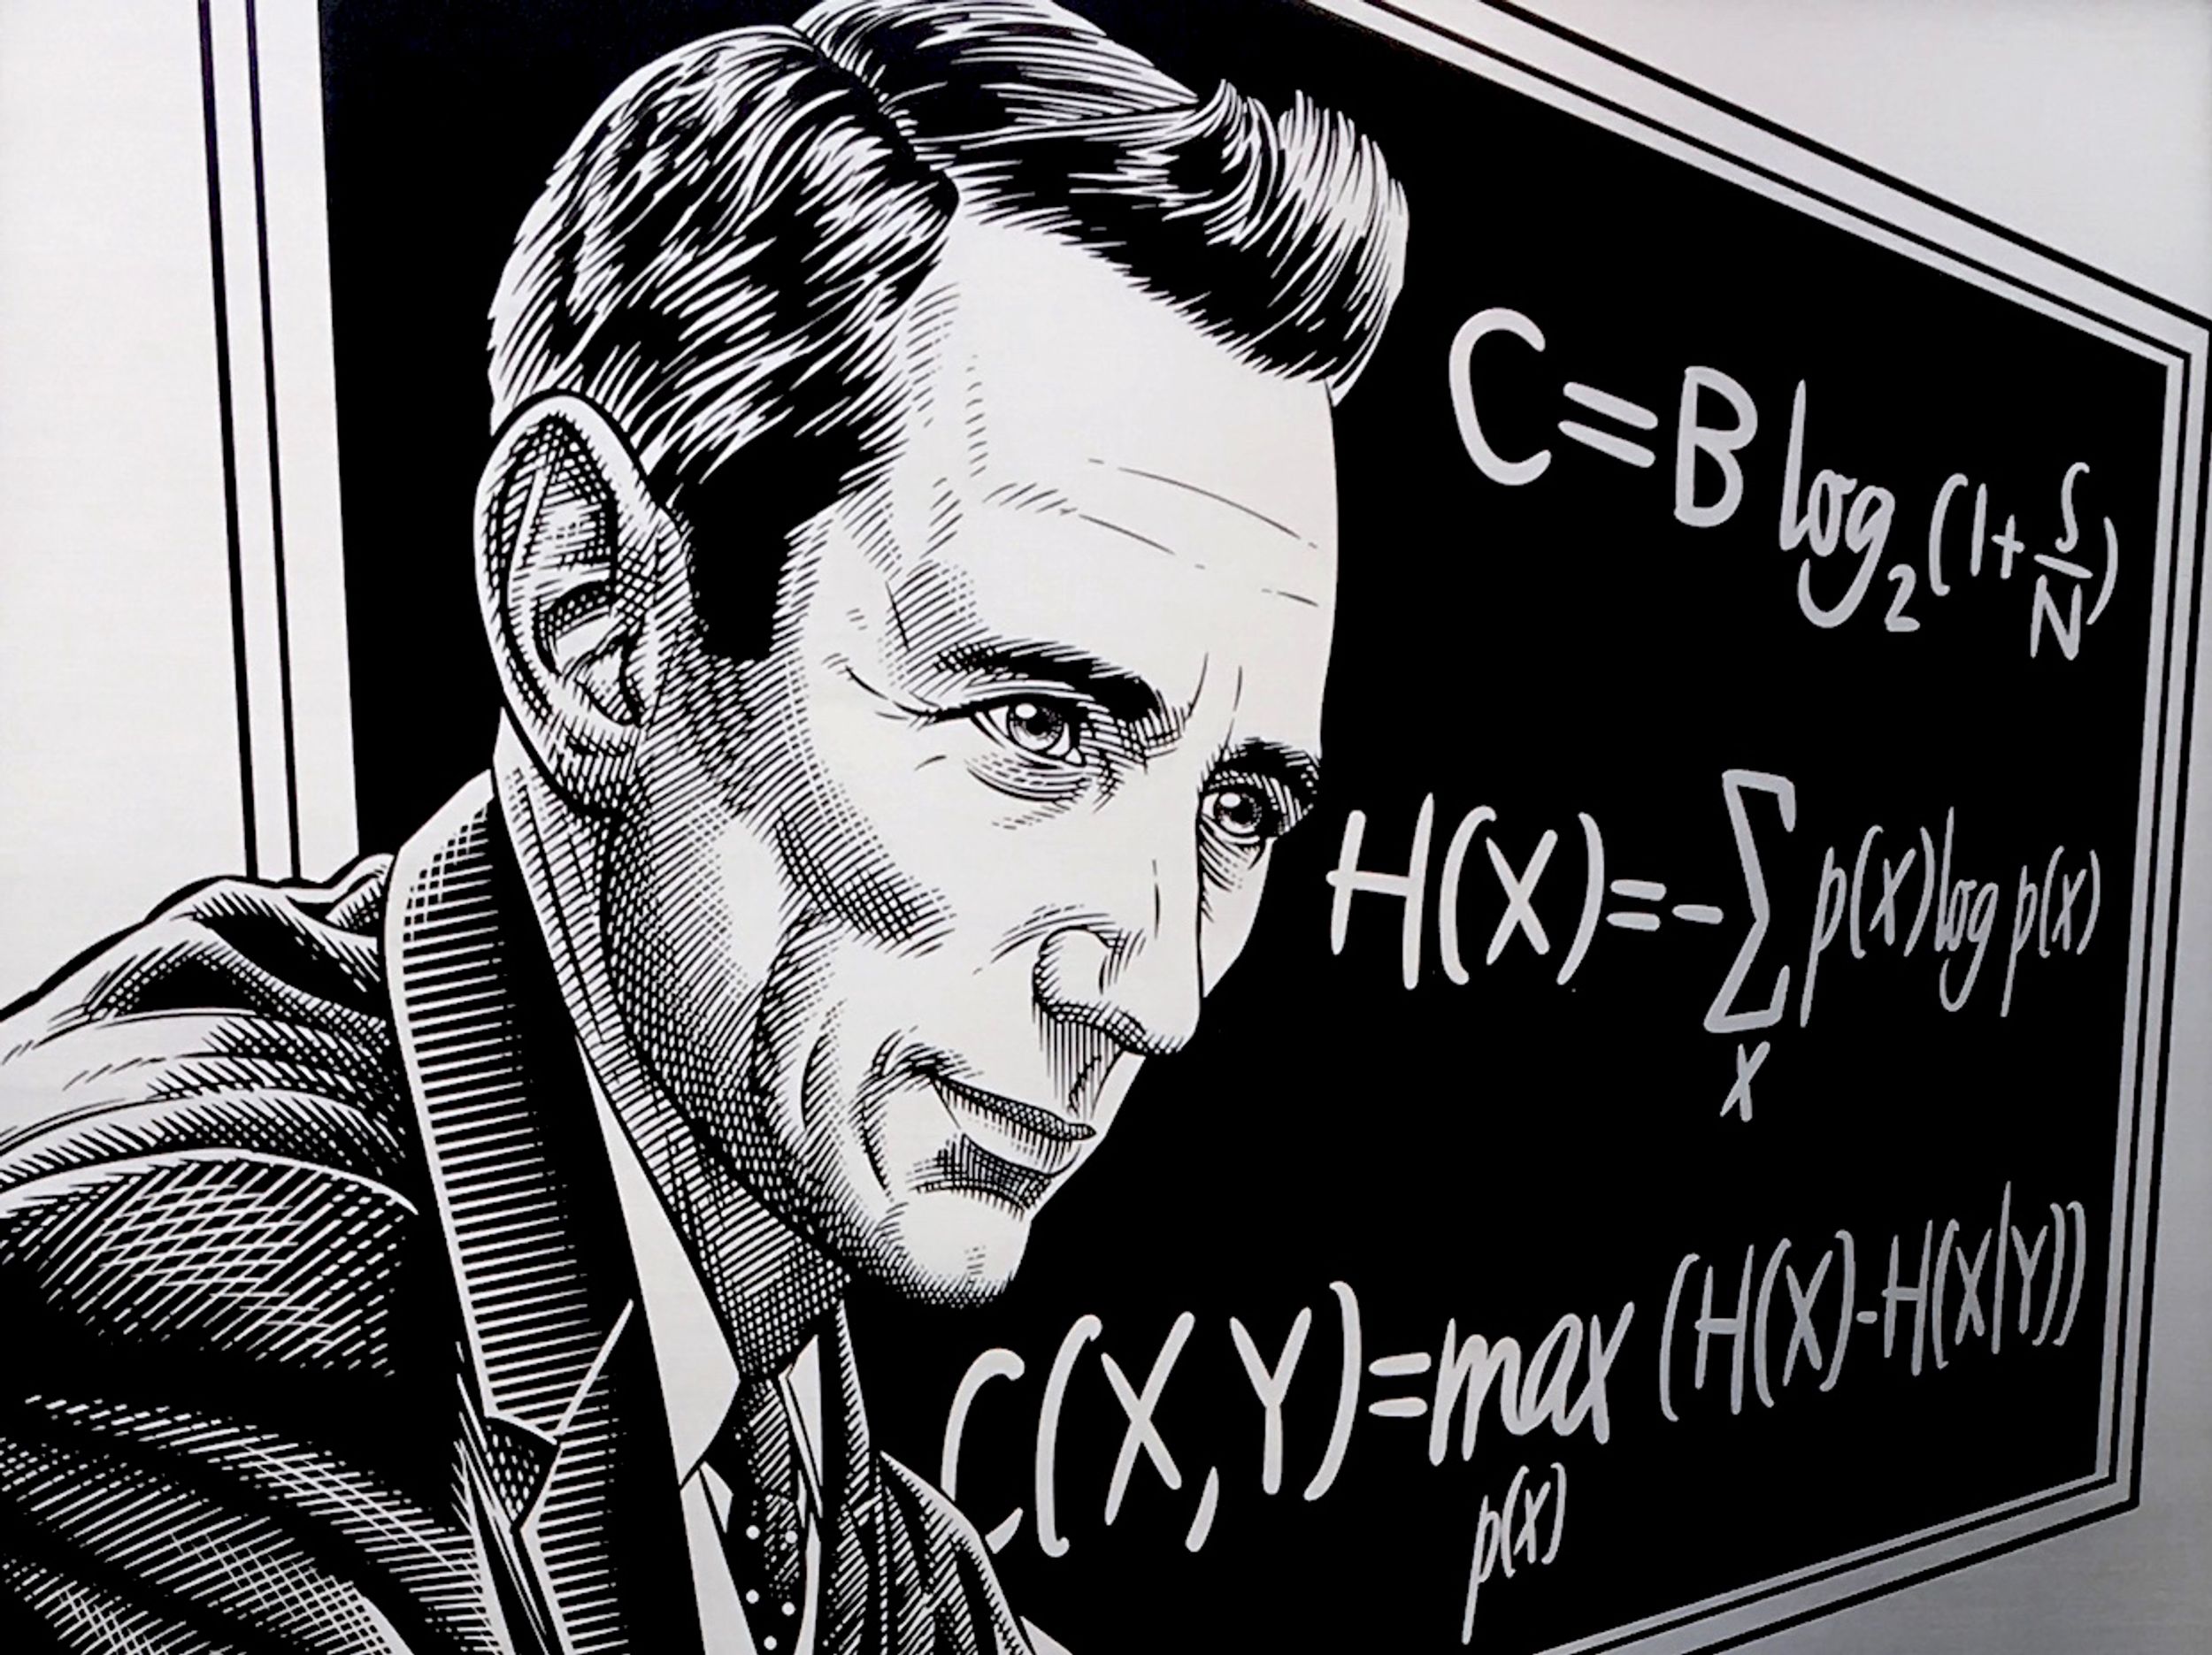 Bell Labs Looks at Claude Shannon’s Legacy and the Future of Information Age